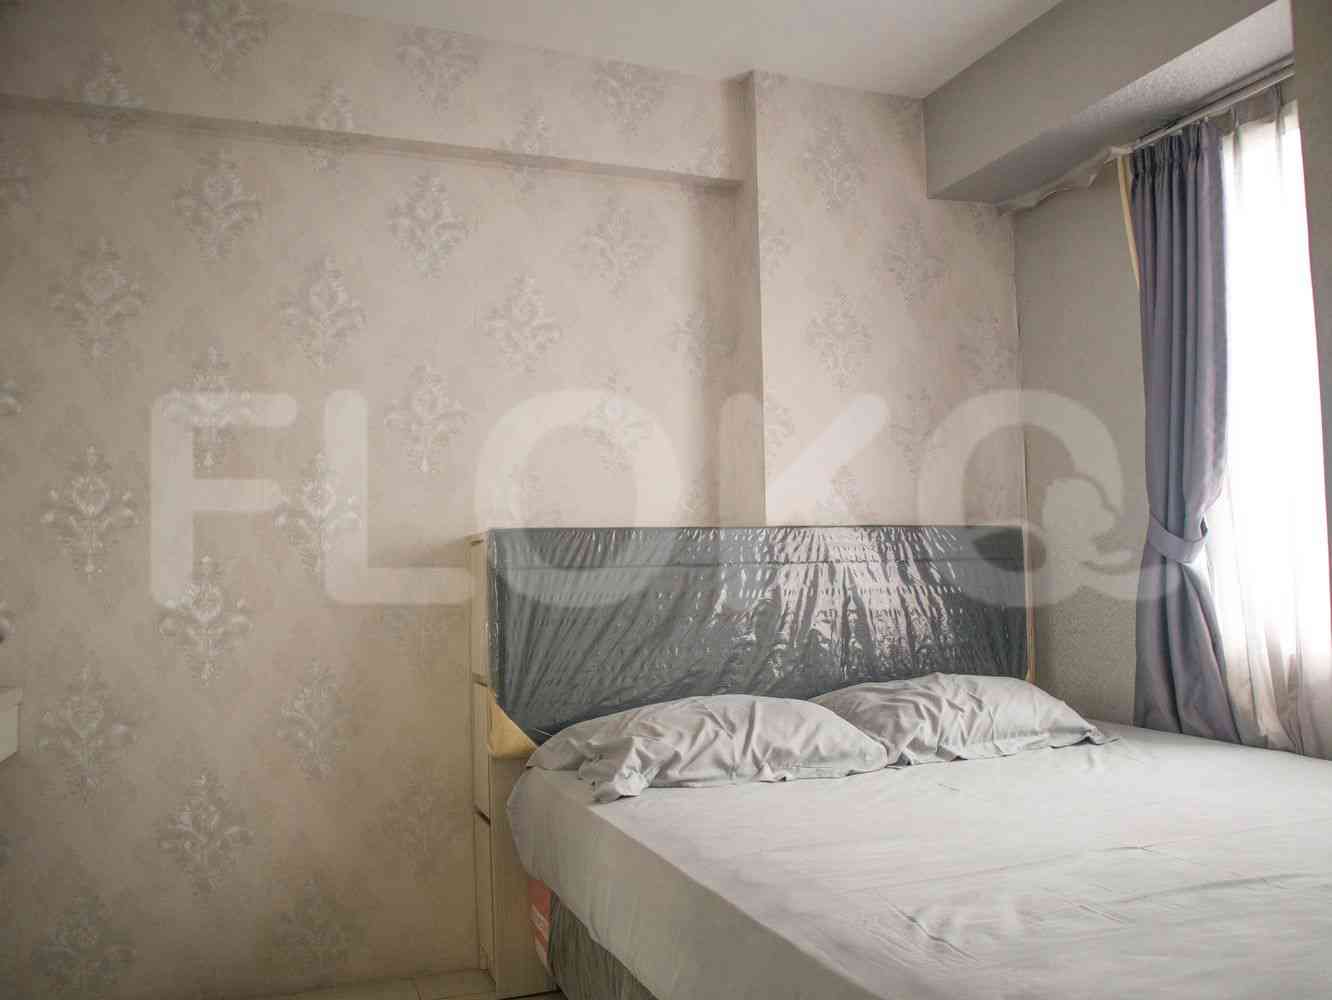 2 Bedroom on 44th Floor for Rent in Bassura City Apartment - fcif14 4